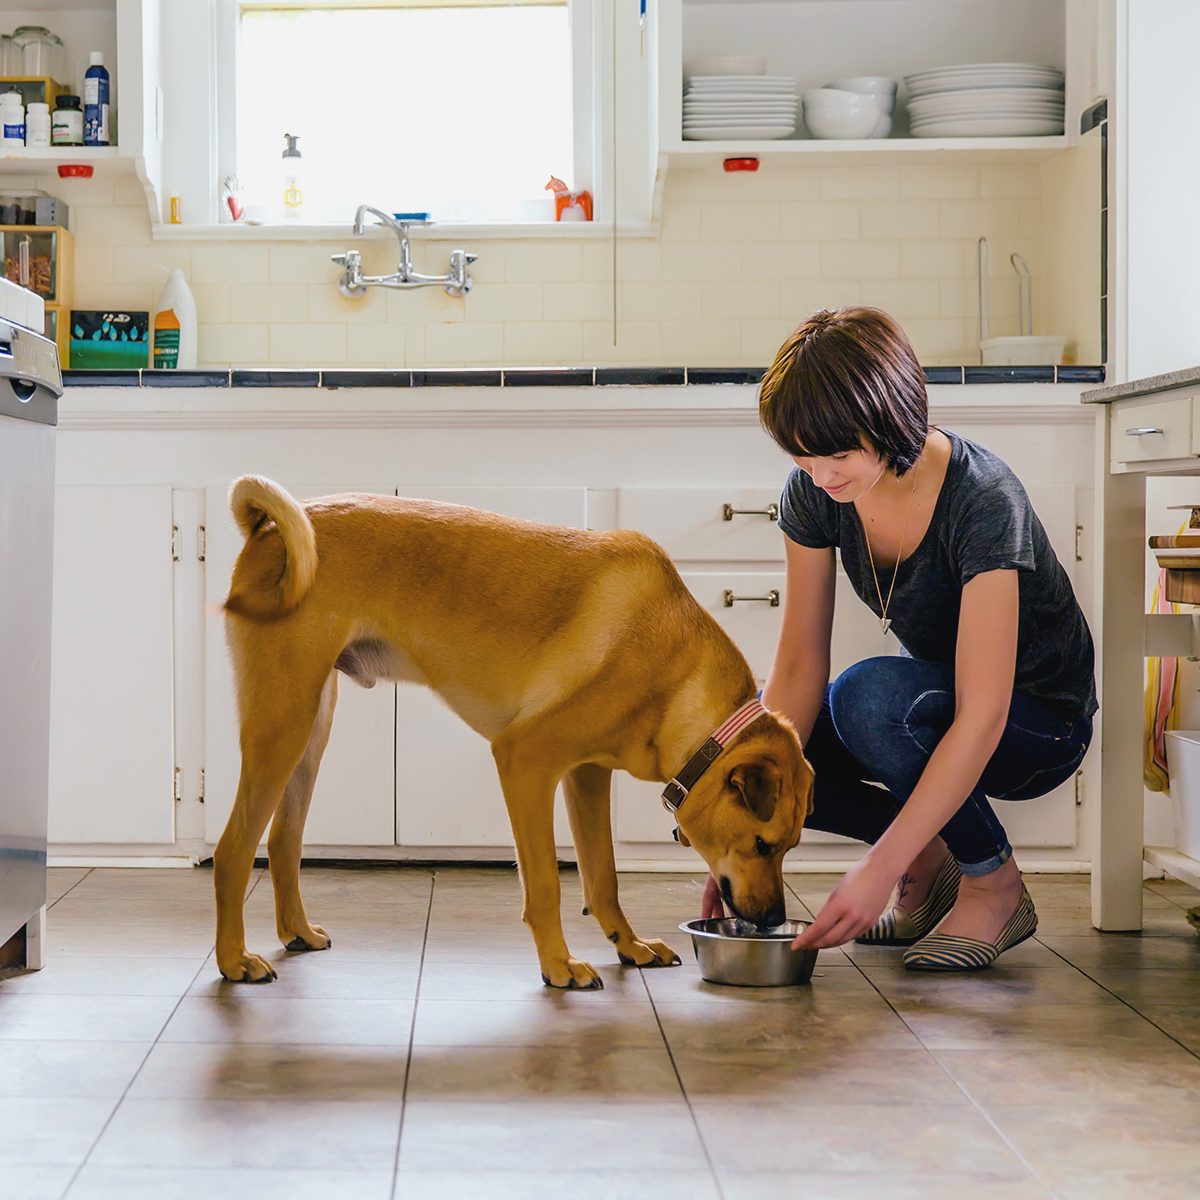 <p>Want your dog to get as close to a natural diet as possible? Opt for fresh food. Dr. Burch likes using recipes from websites like <a href="https://secure.balanceit.com/index.php" rel="noopener noreferrer">BalanceIt.com</a> and <a href="https://www.petdiets.com/Homemade-Diets" rel="noopener noreferrer">PetDiets.com</a>, which, for a small fee per recipe, provide you with customized, vet- and nutritionist-approved recipes specifically formulated for your dog based on his age and breed. "Recipes from these sources will also ensure your pet's diet meets all the necessary minerals, vitamins, and nutrients needed for a healthy life," she says, since most dog food recipes you'll find online are not nutritionally balanced. (In fact, in an independent study of 200 homemade recipes for adult dogs conducted by the School of Veterinary Medicine at University of California in 2013, only 2.5 percent were nutritionally balanced.) On these sites, you can expect tailored recipes for large dog breeds that you can whip up at home, like meals made with beef, brown rice, peas, and carrots.</p> <p><strong>Highlights:</strong></p> <ul> <li>Easy recipes</li> <li>Great for picky eaters</li> <li>Customizable</li> </ul> <p class="listicle-page__cta-button-shop"><a class="shop-btn" href="https://secure.balanceit.com/index.php">Shop Now</a></p>